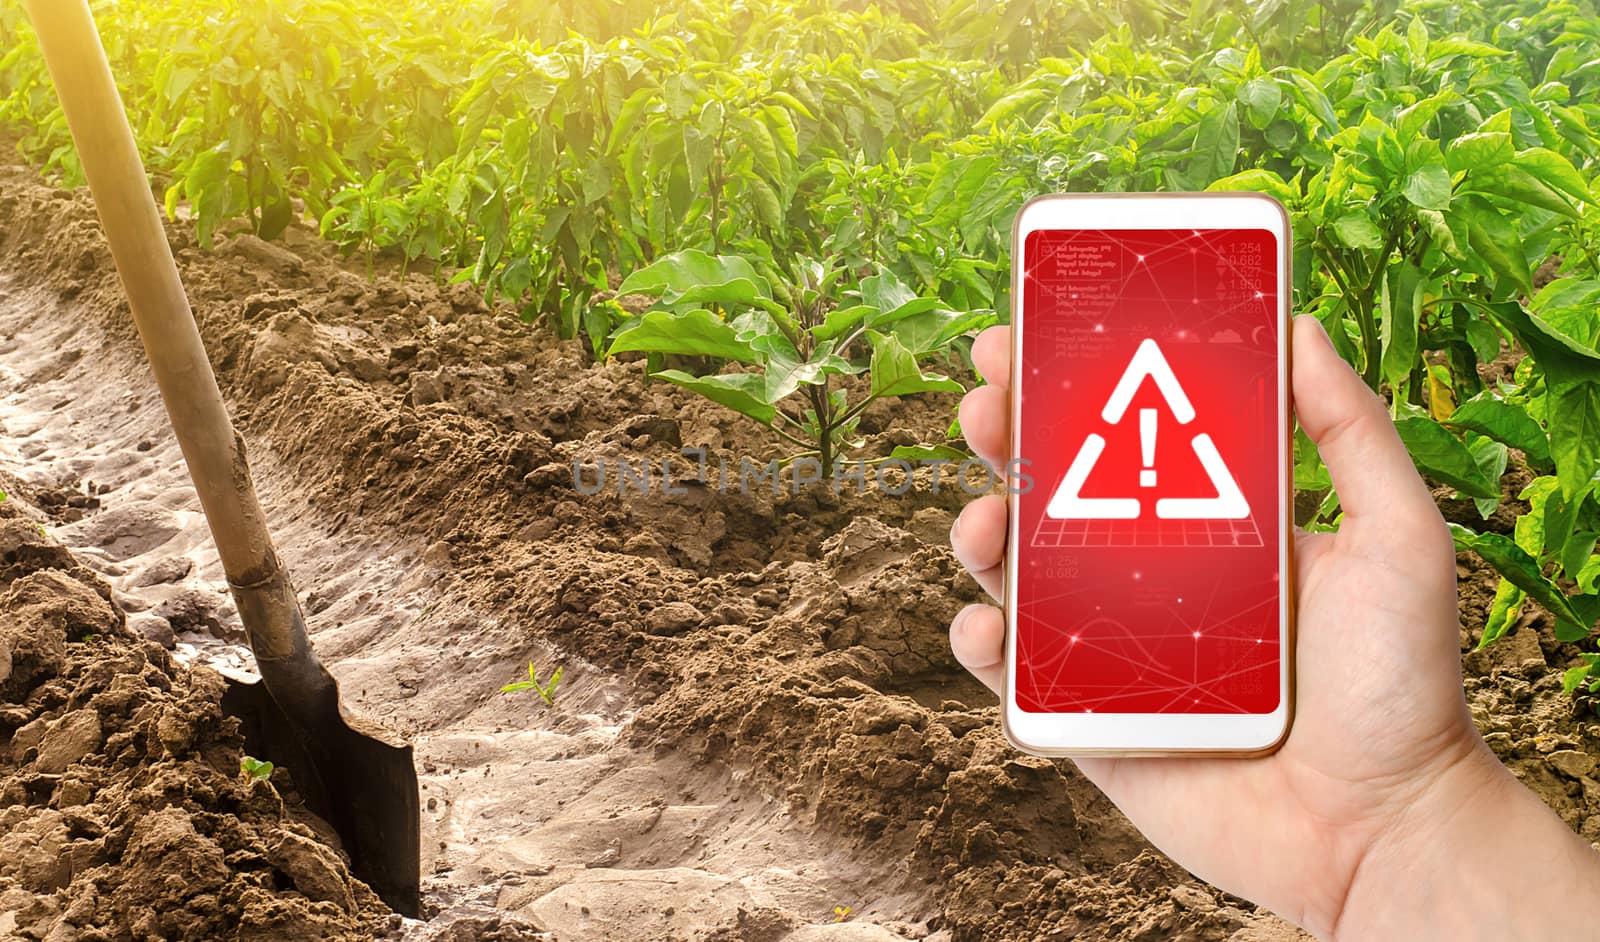 A phone and a warning sign on the background of pepper plantation and irrigation channel with a shovel. Harmful pesticides and chemicals in agriculture. Environmental hazard, microplastics in the crop